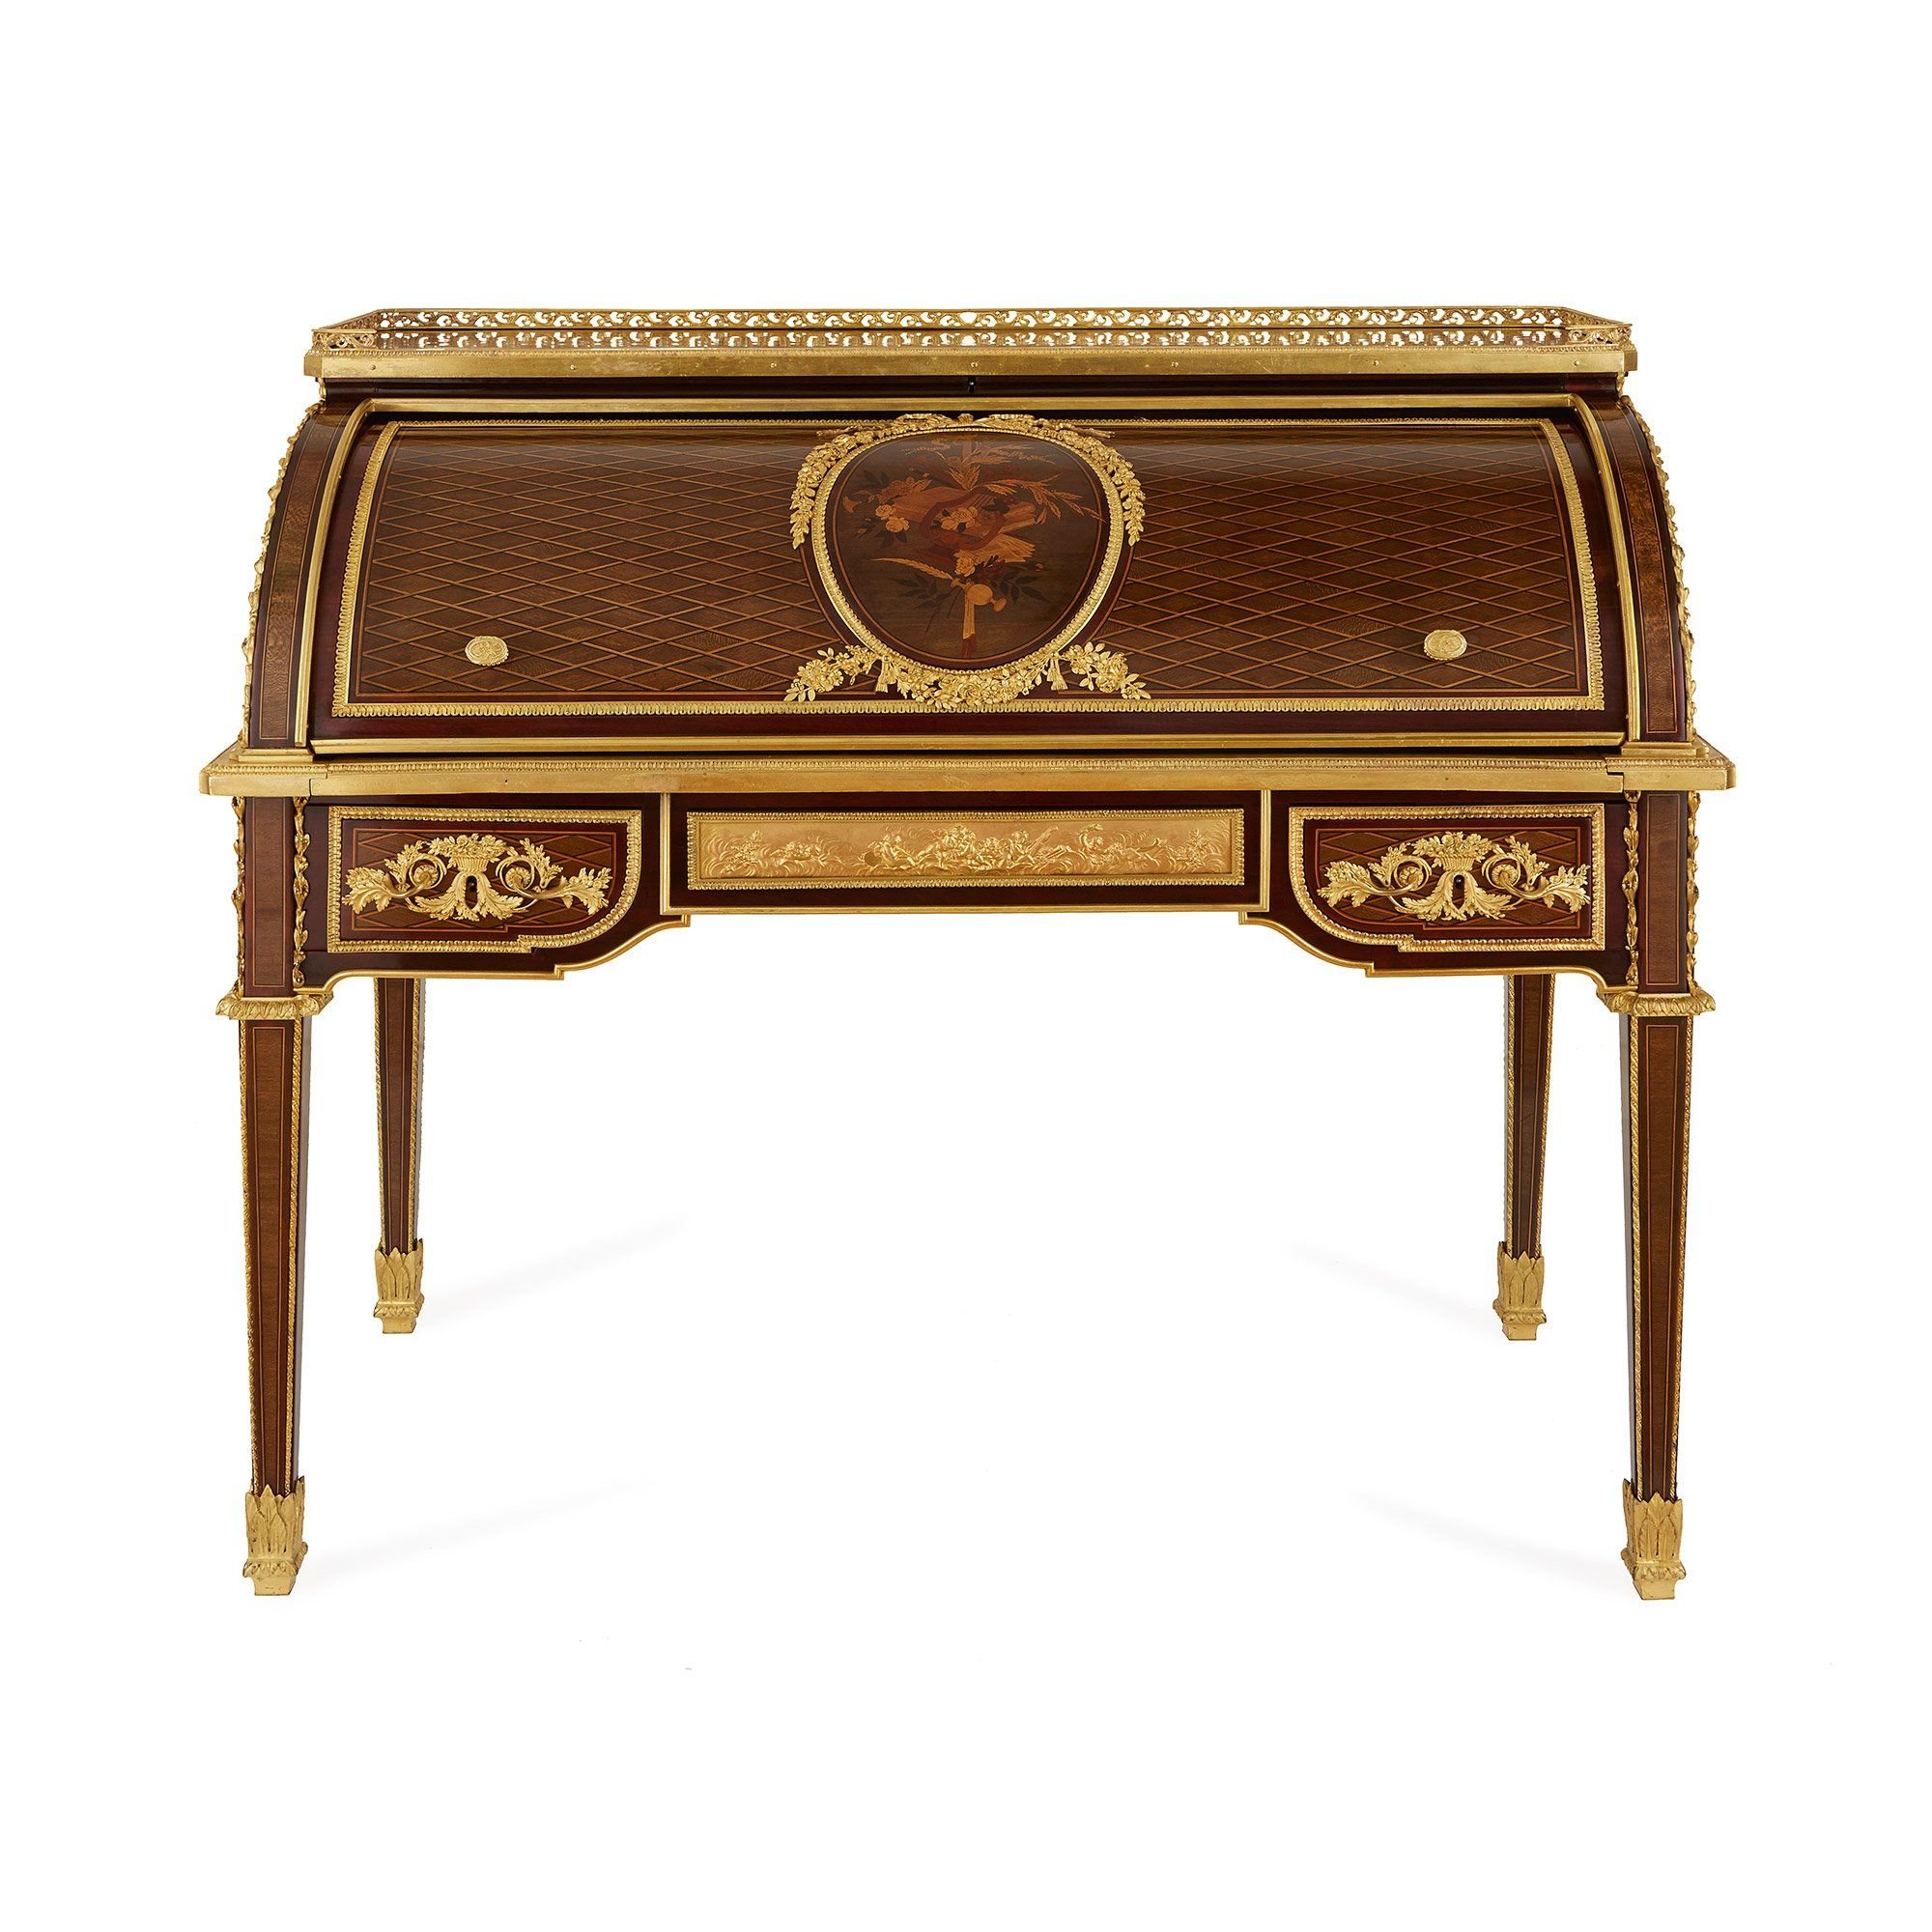 FRENCH MARQUETRY DESK with Ormolu